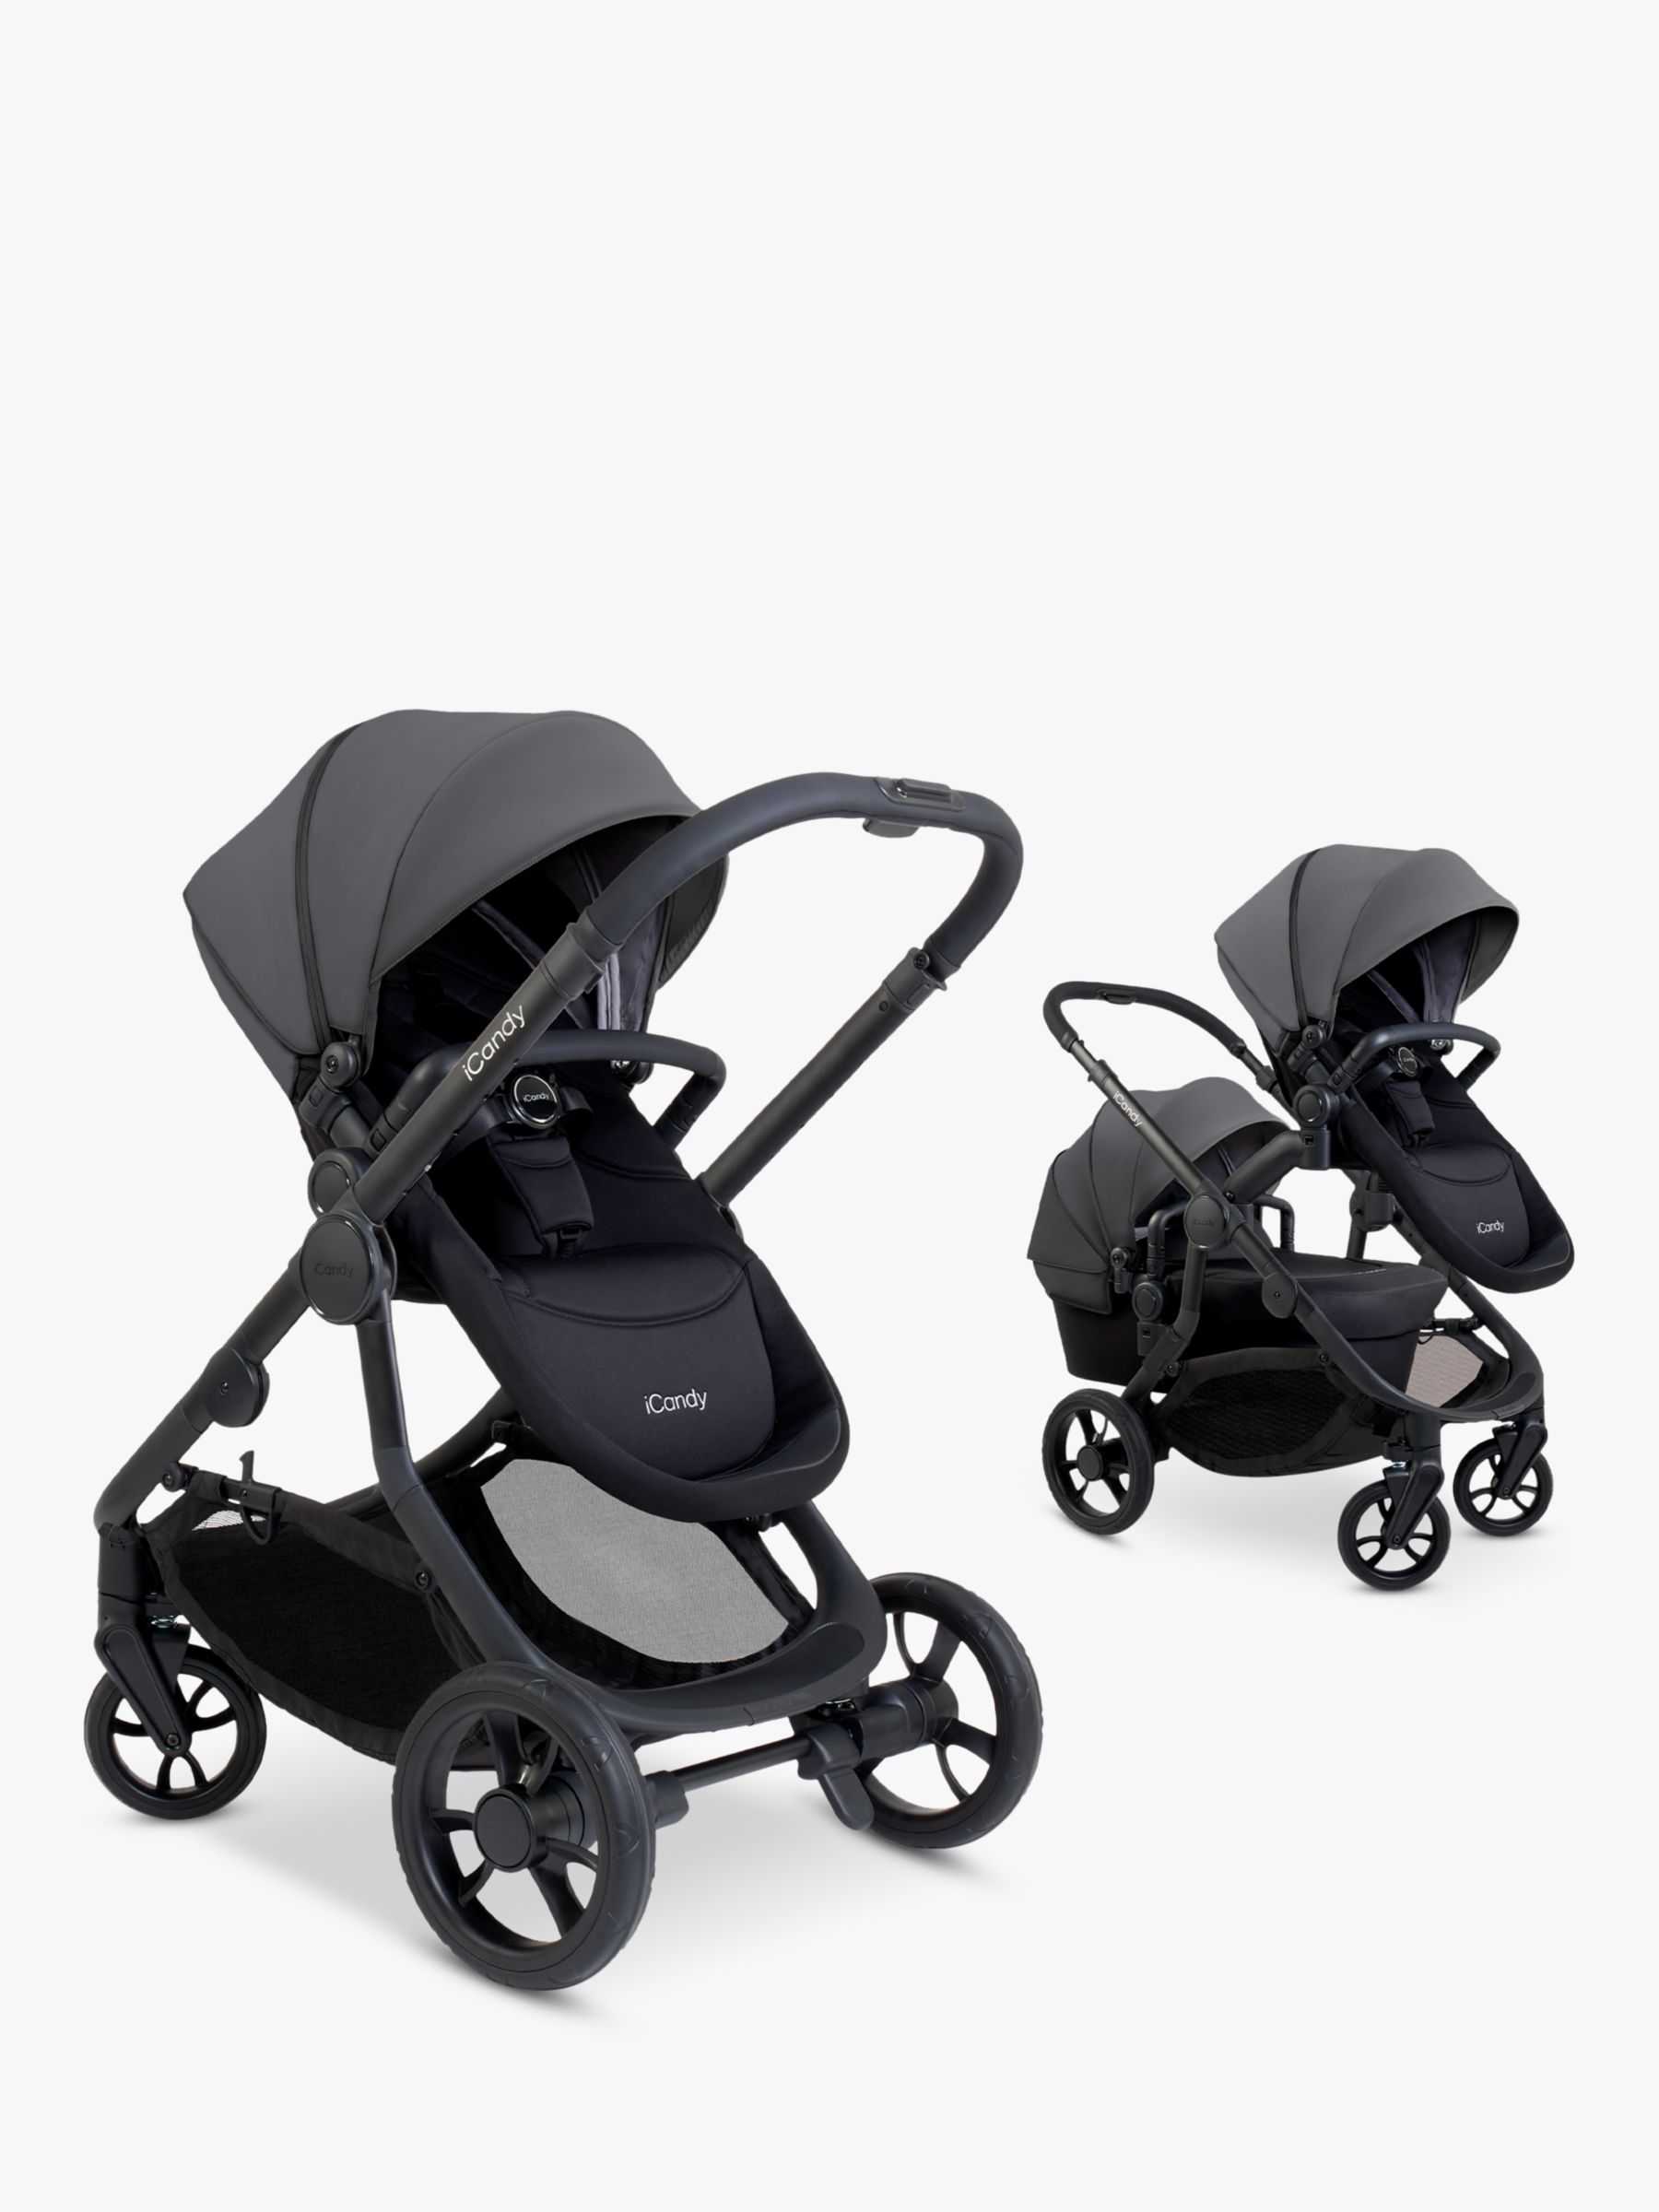 iCandy 4 Pushchair, Carrycot and Accessories Complete Bundle